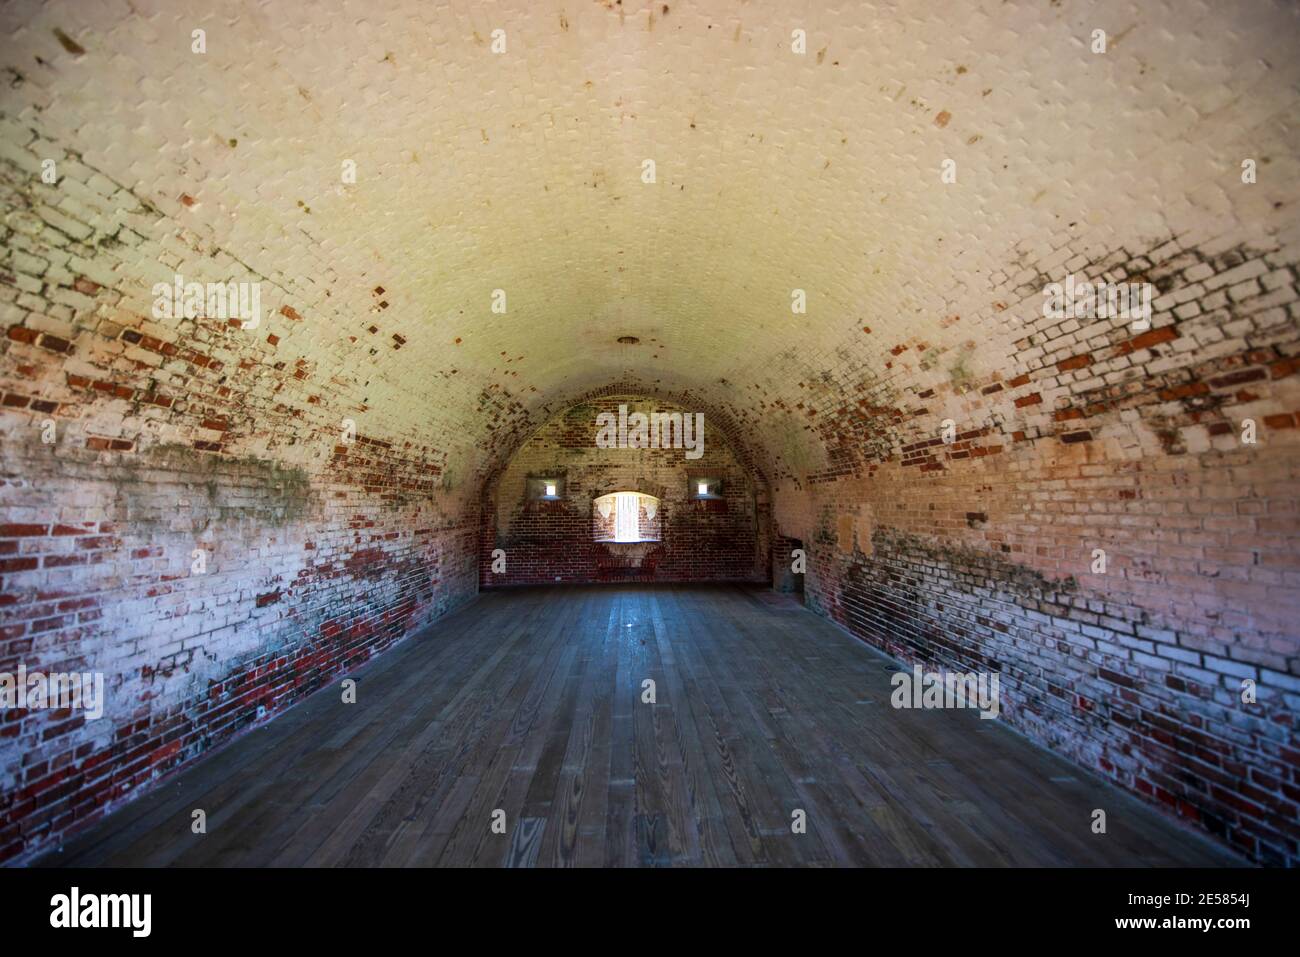 Interior view of casement at Fort Macon State Park in Atlantic Beach, NC. Fort Macon was constructed after the War of 1812 to defend Beaufort Harbor. Stock Photo